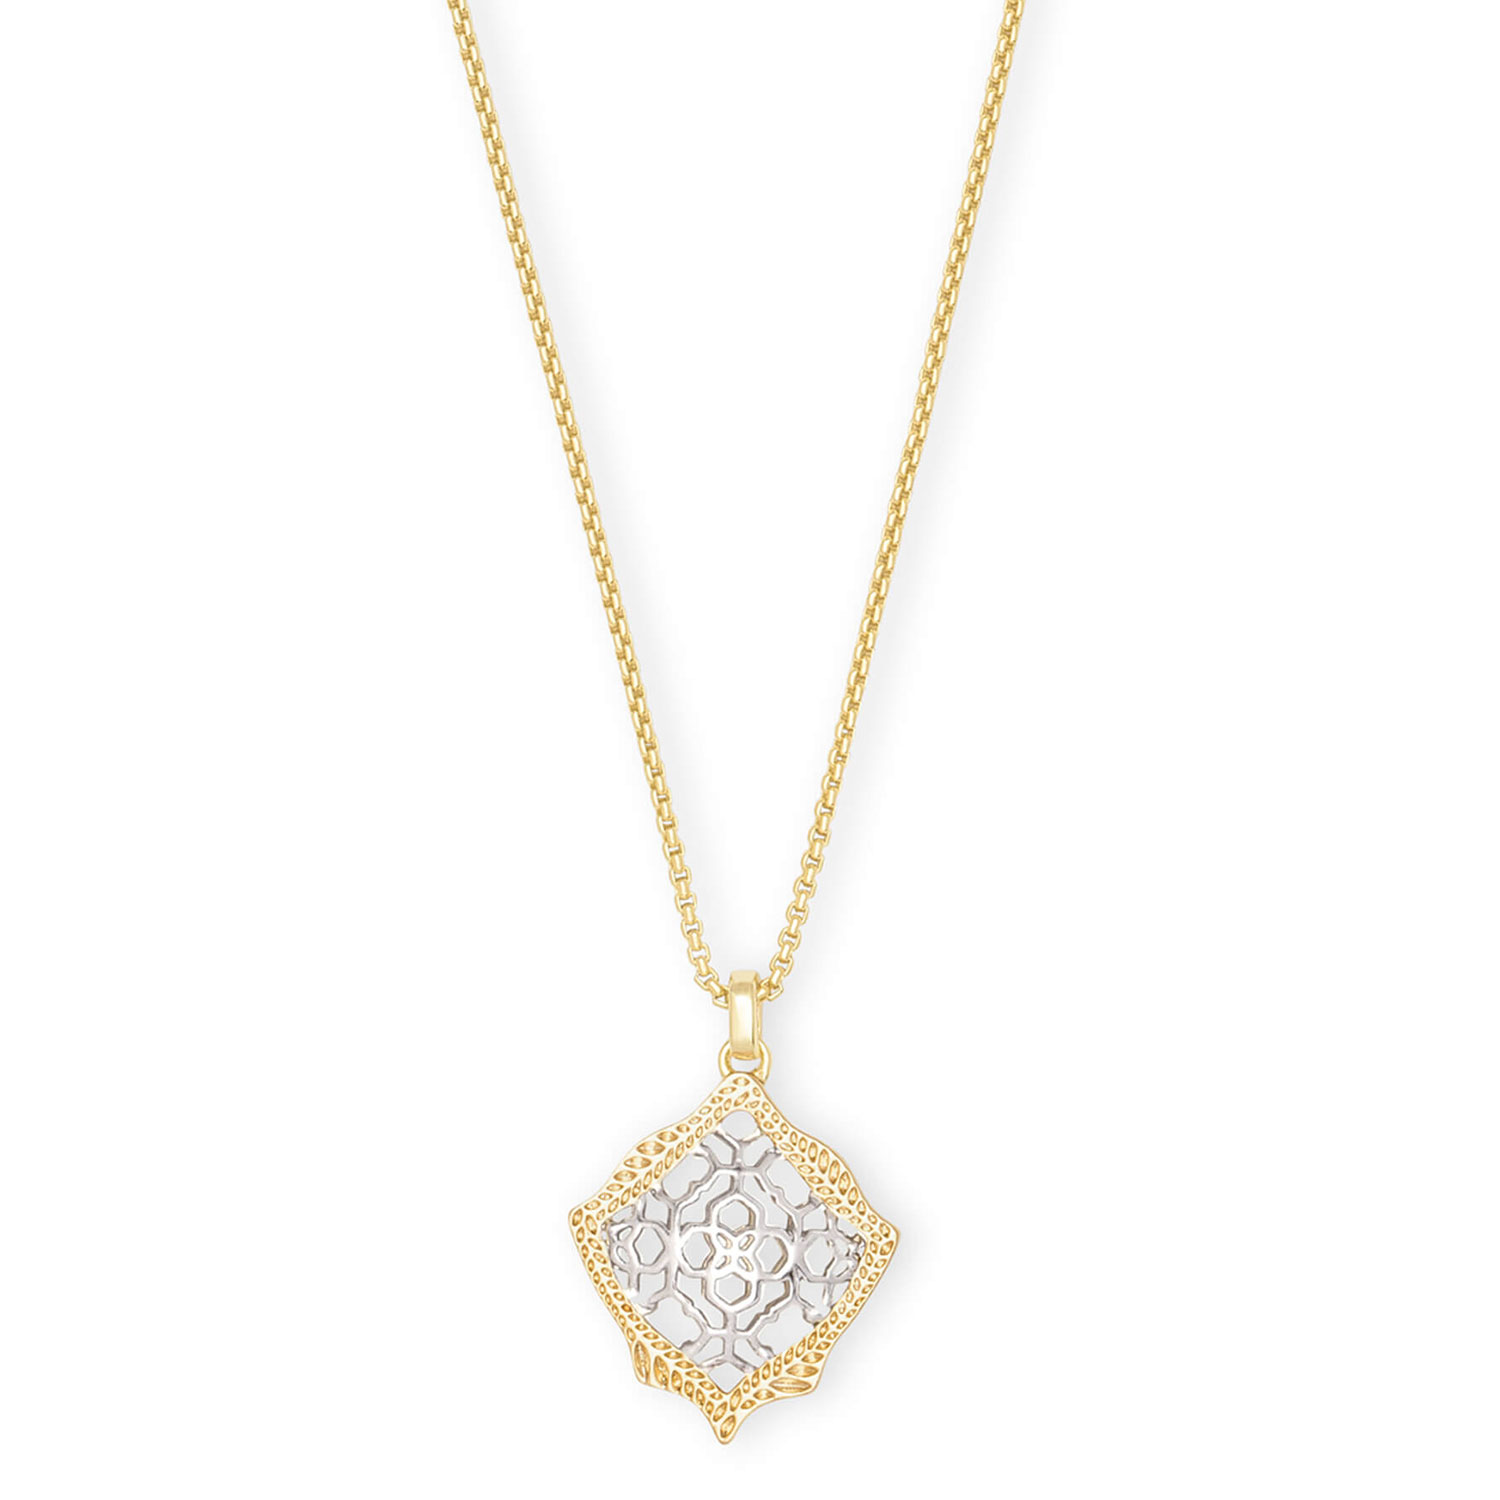 Kendra Scott Kacey Gold Long Pendant Necklace in Silver Filigree Mix ...